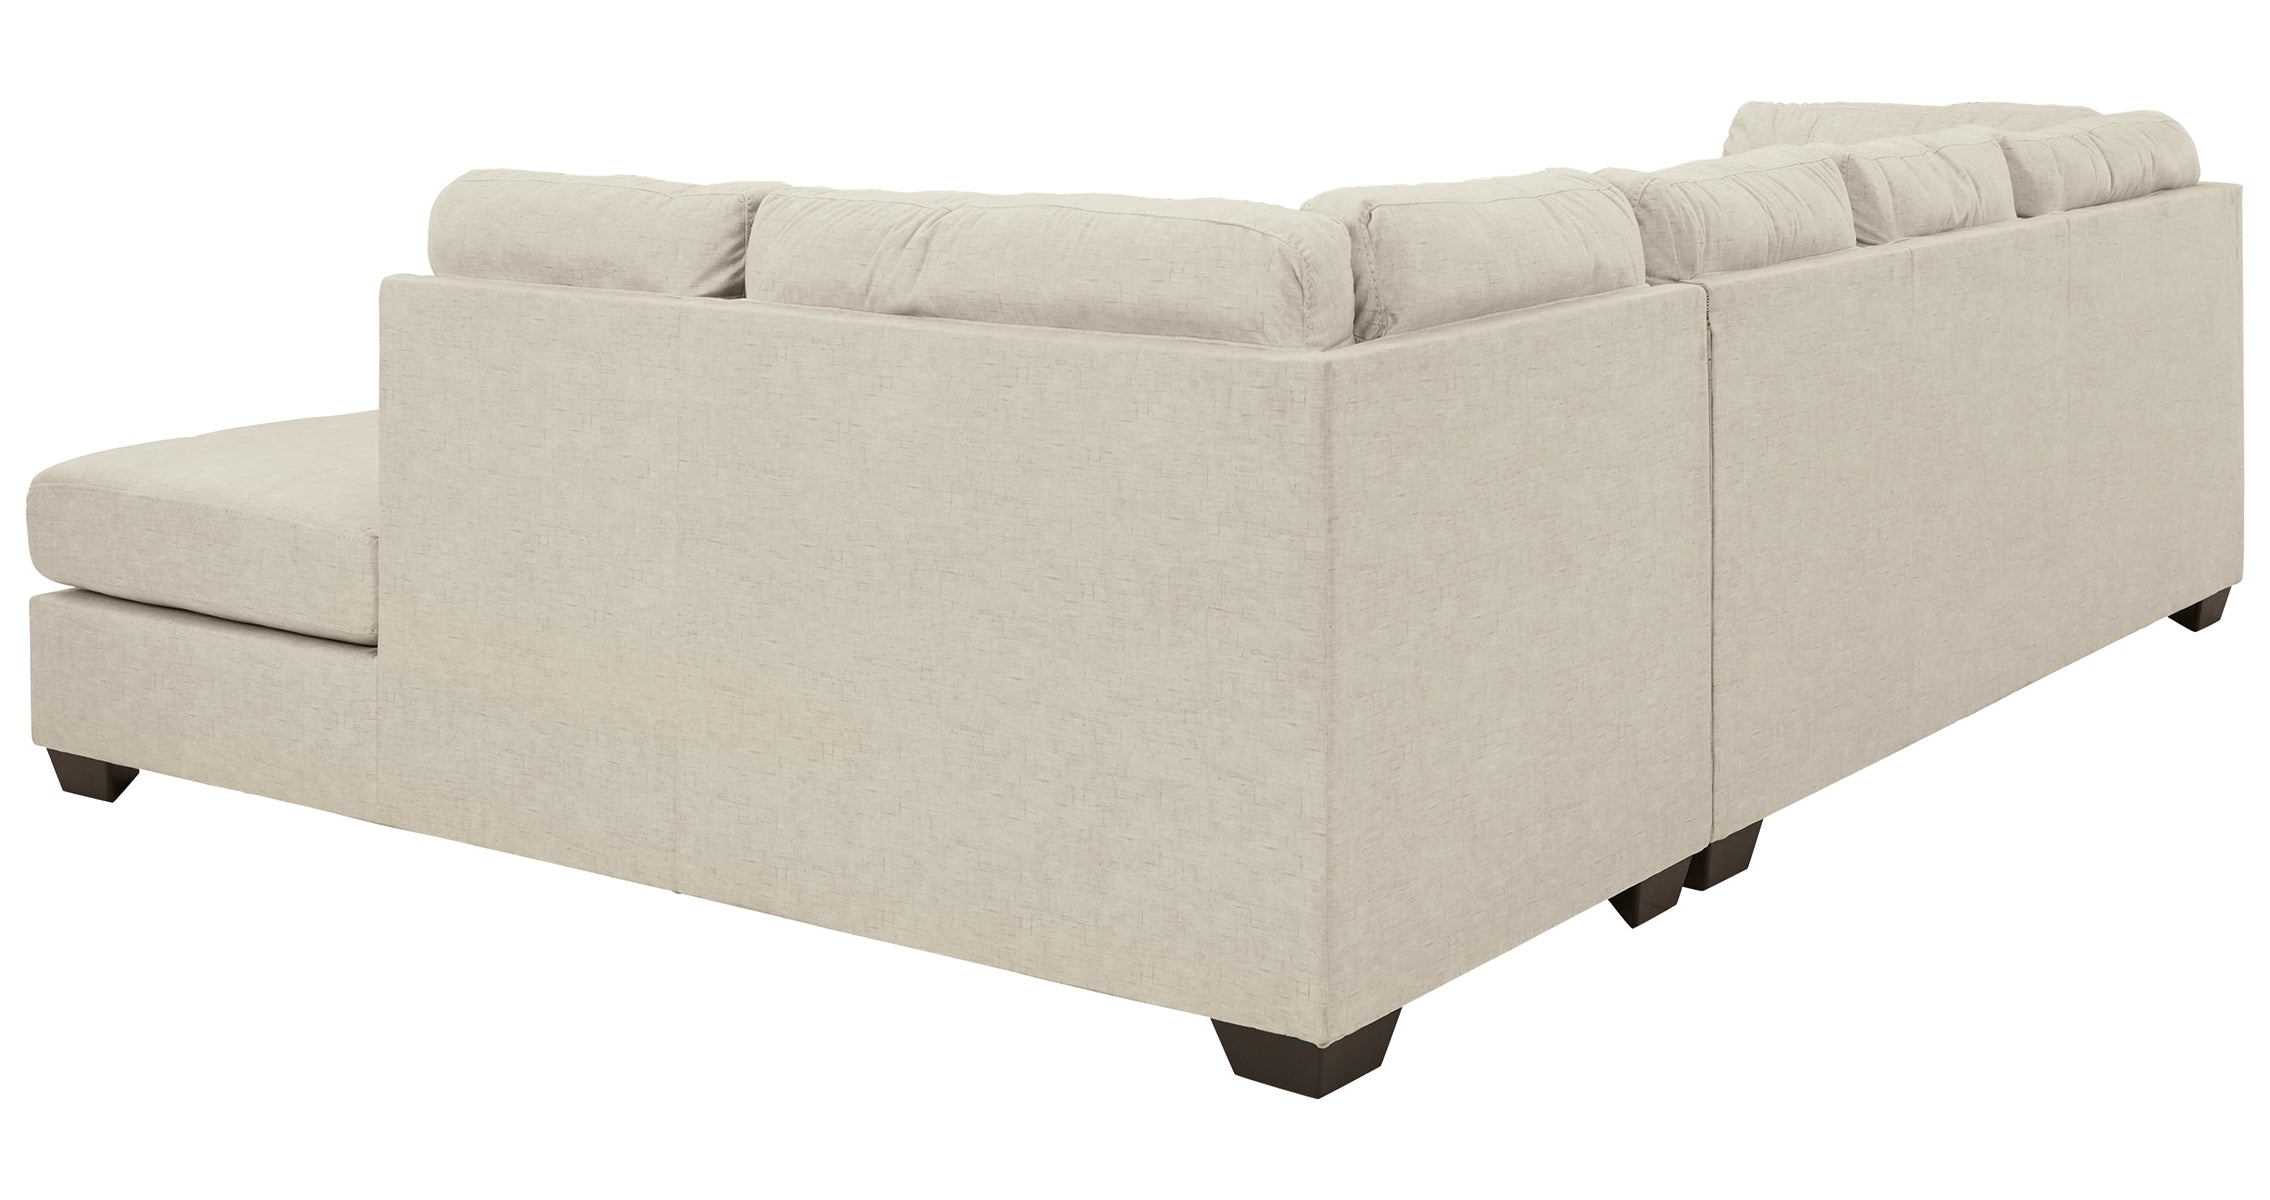 Falkirk 2-Piece Sectional with Chaise